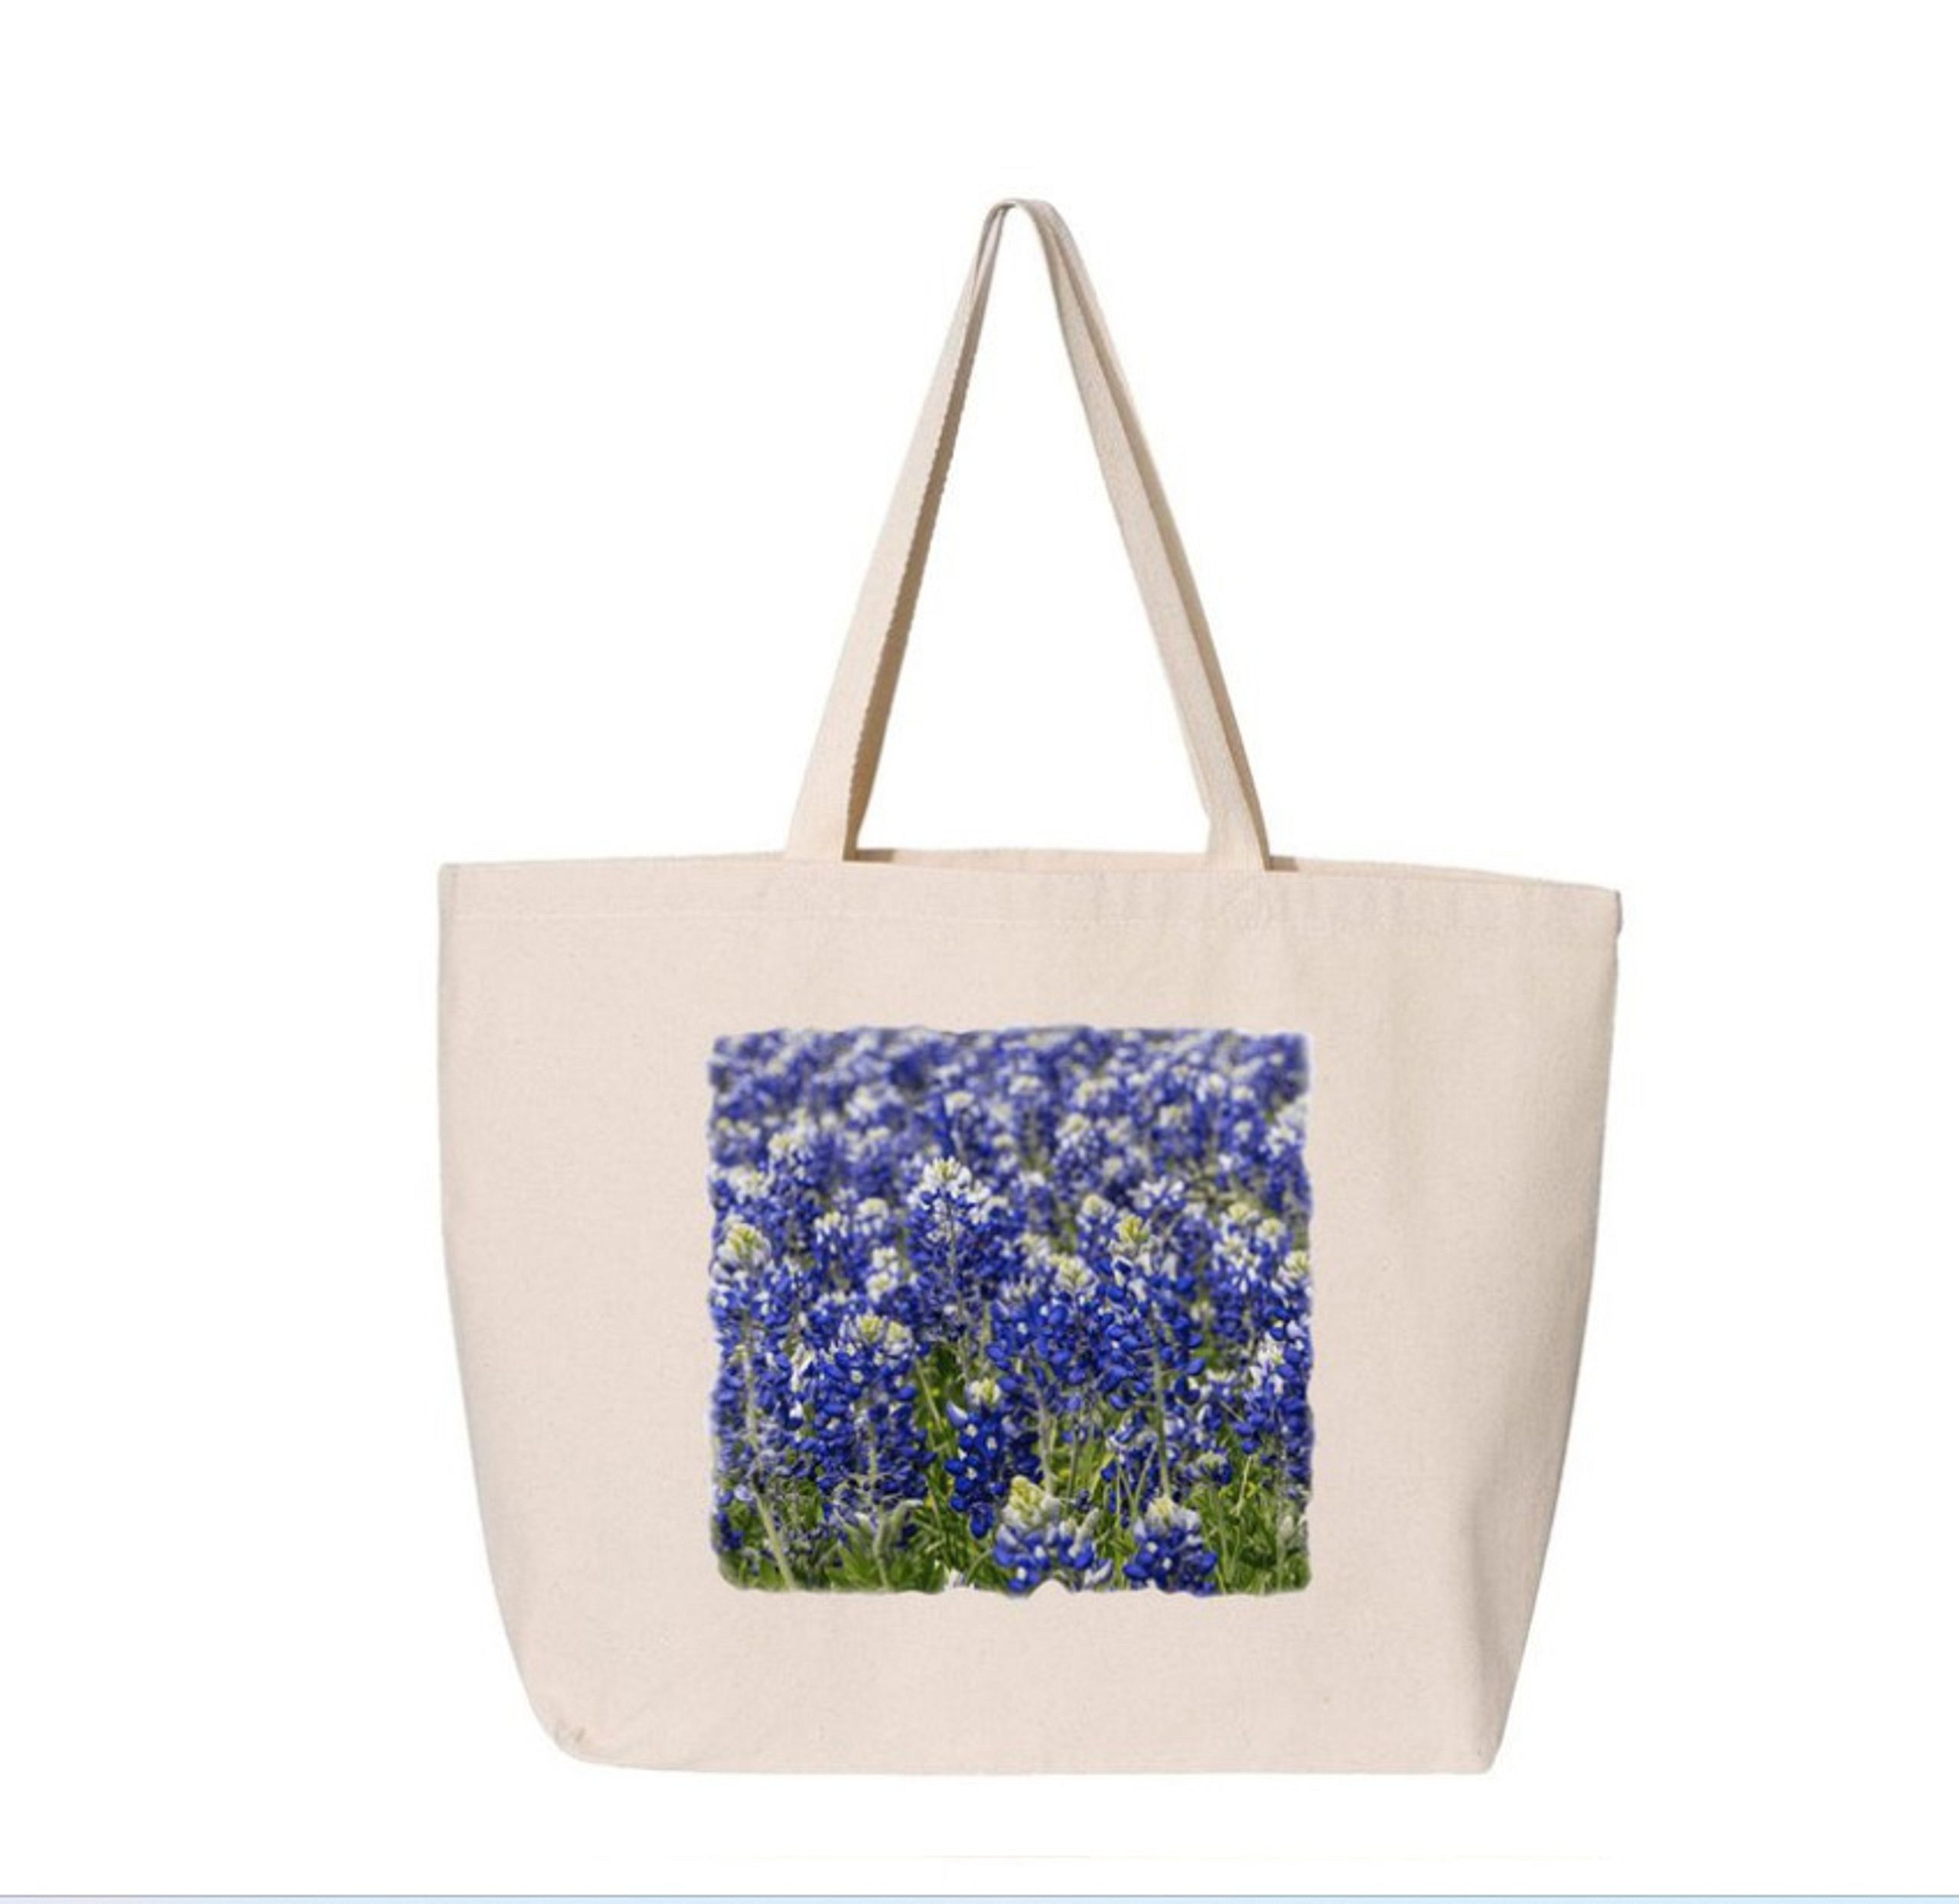 Jumbo Tote in 2 Colors with Bluebonnets